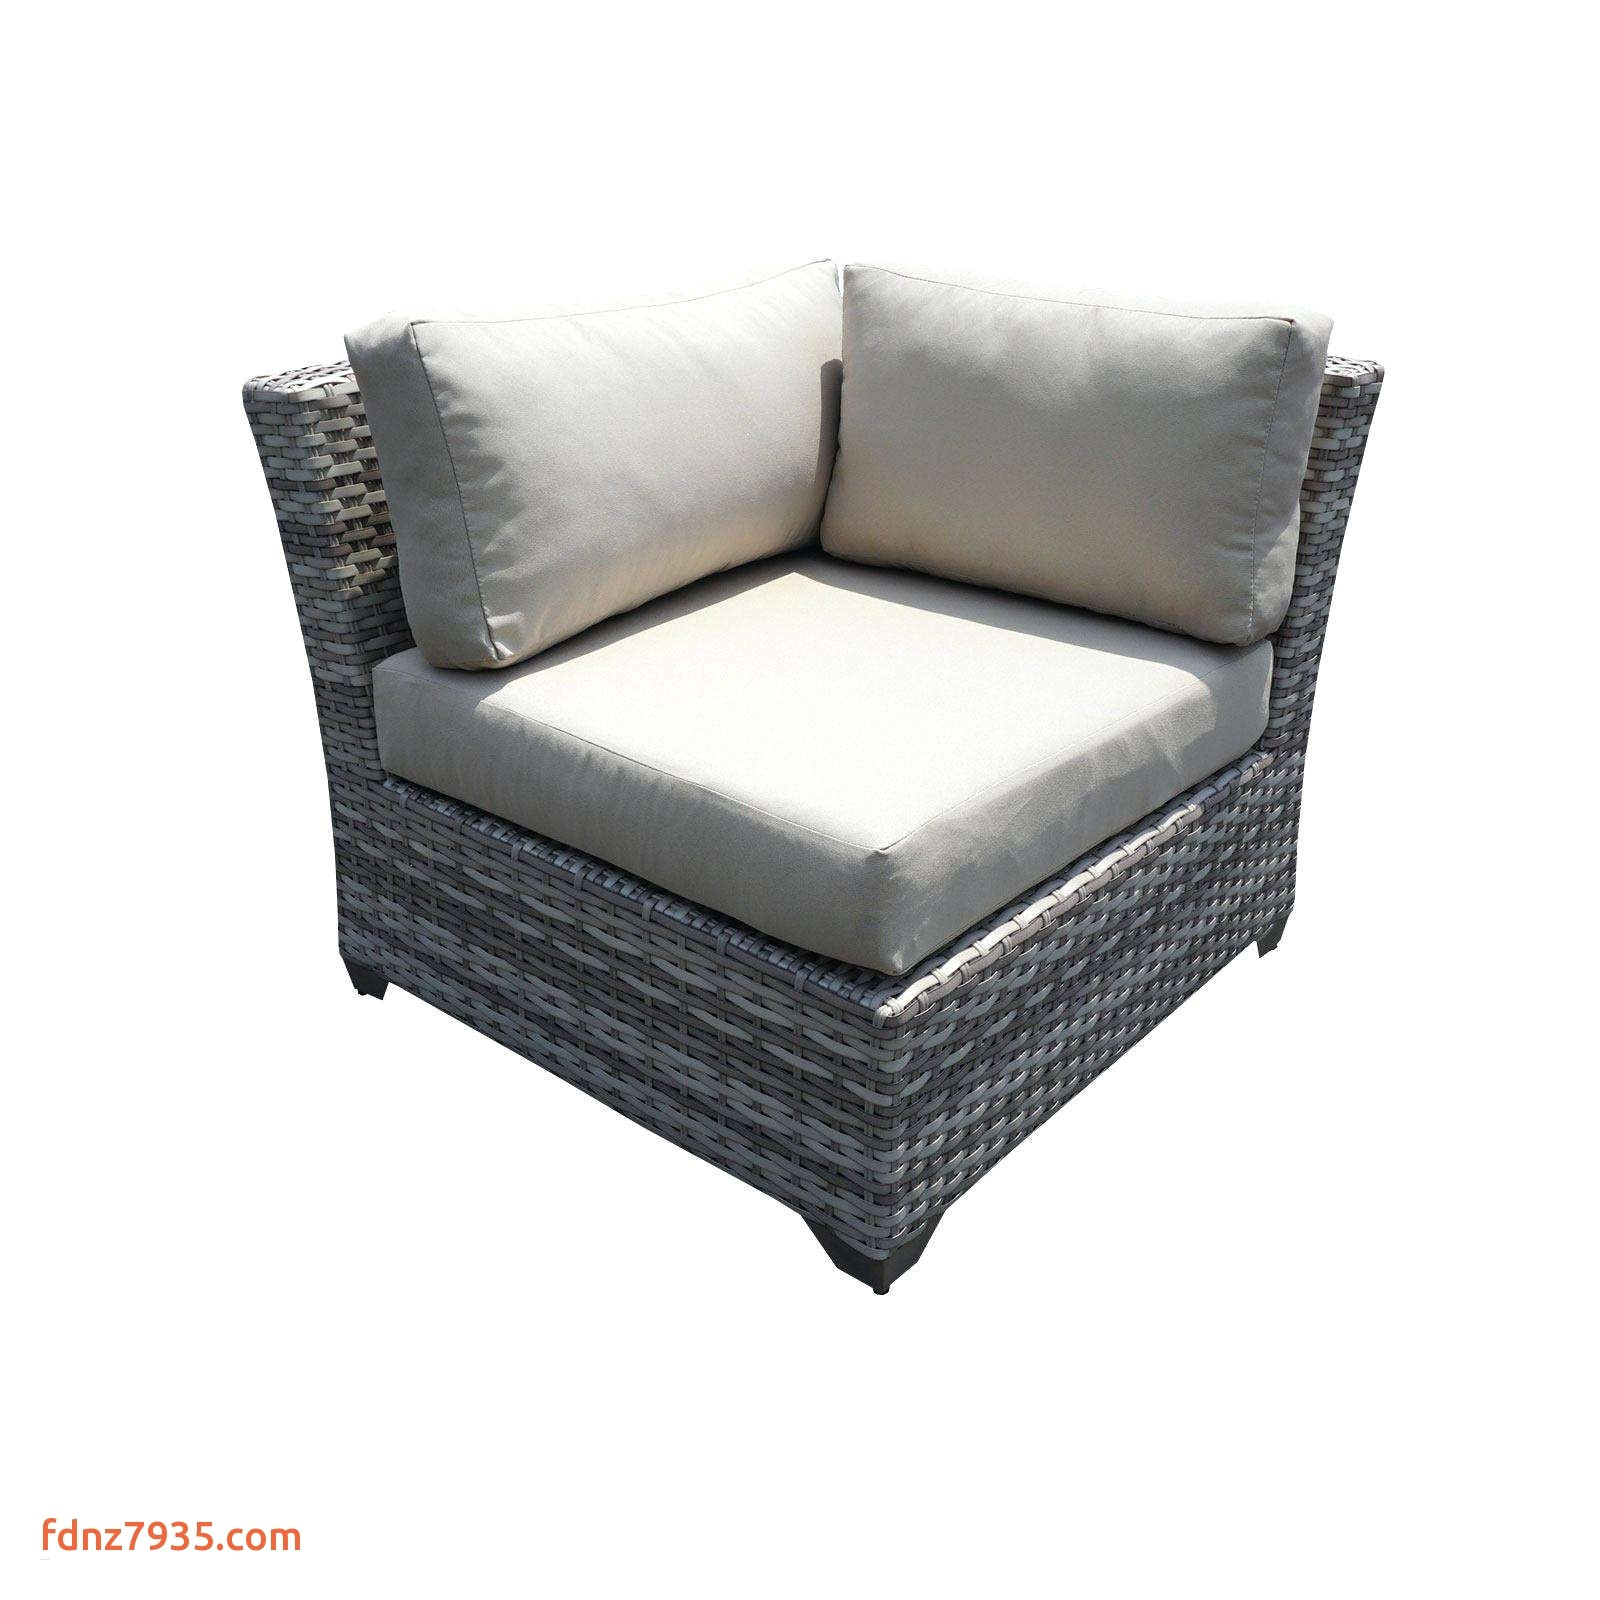 wicker outdoor sofa 0d patio chairs sale replacement cushions design outdoor wicker patio furniture